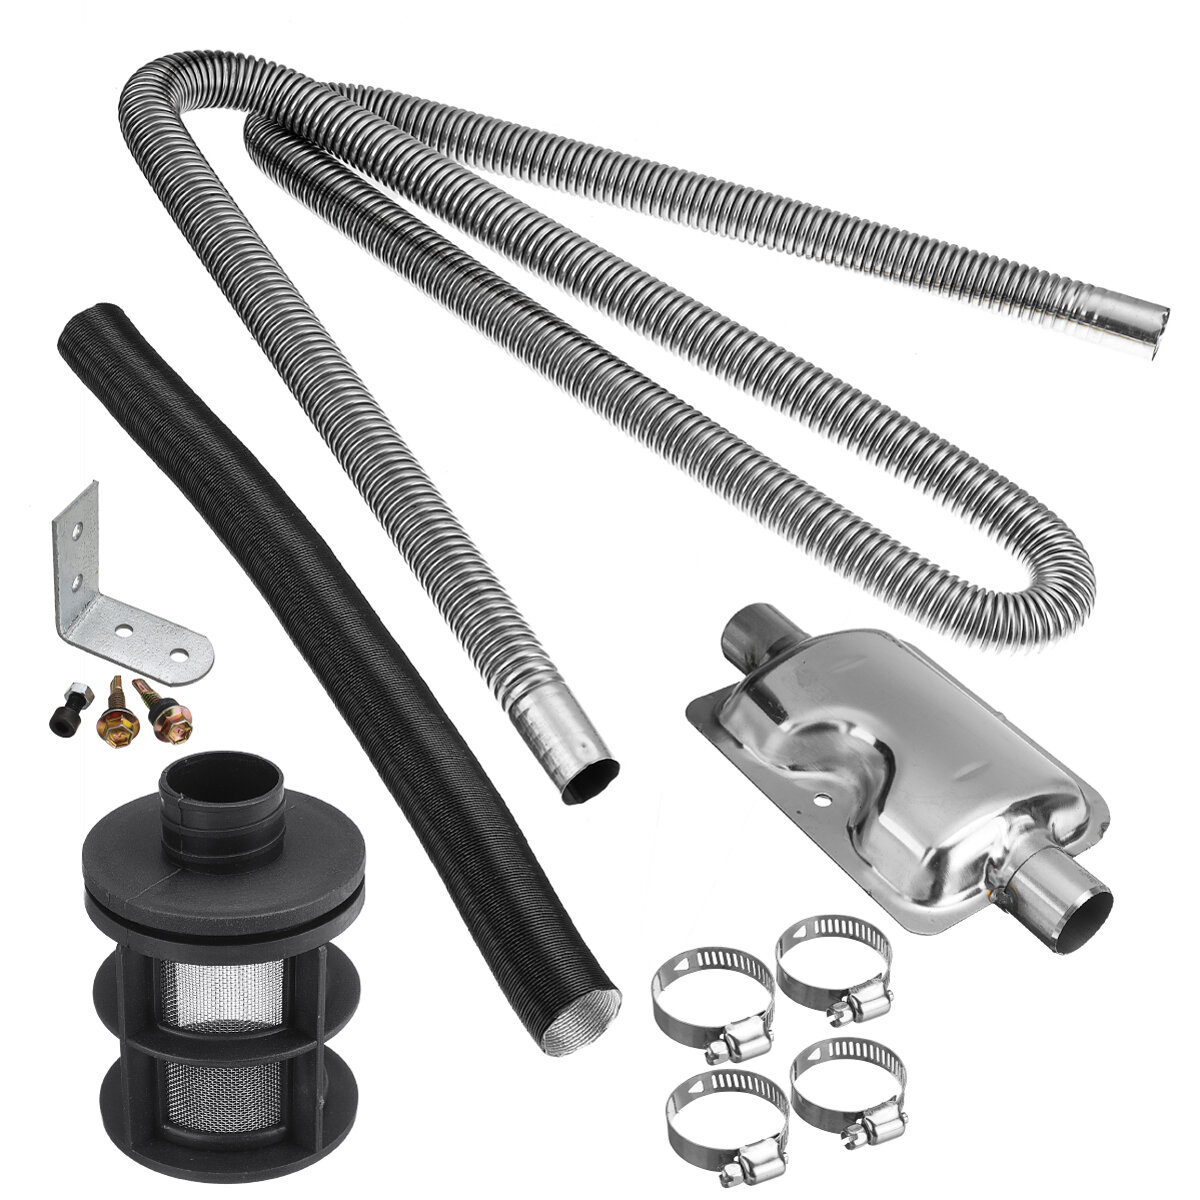 

Stainless Exhaust Muffler Silencer Clamps Bracket Gas Vent Hose Portable 180cm Pipe Silence For Air Diesel Heater